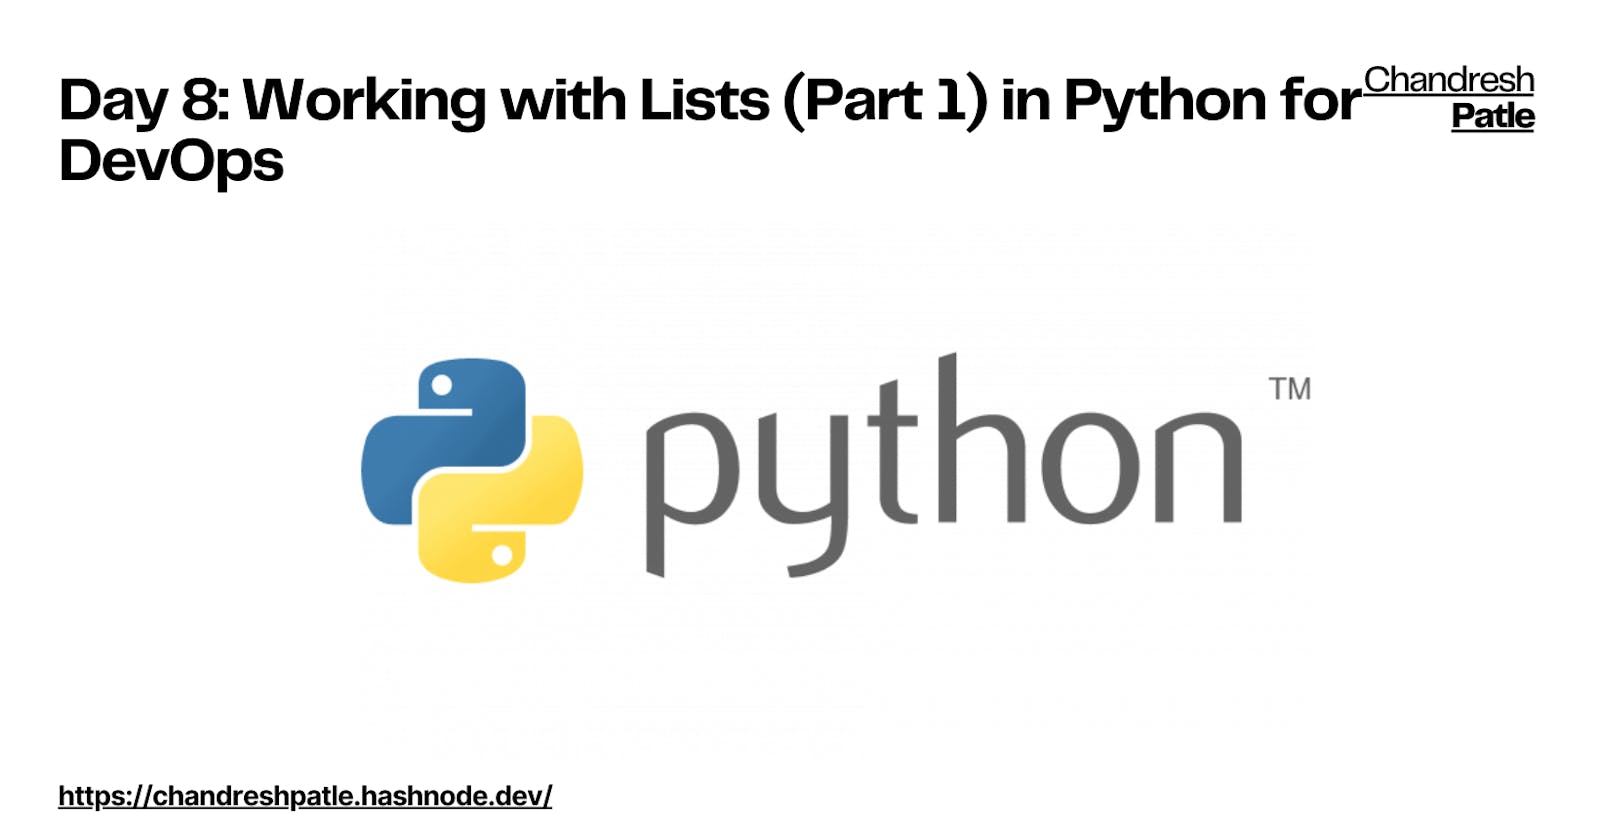 Day 8: Working with Lists (Part 1) in Python for DevOps